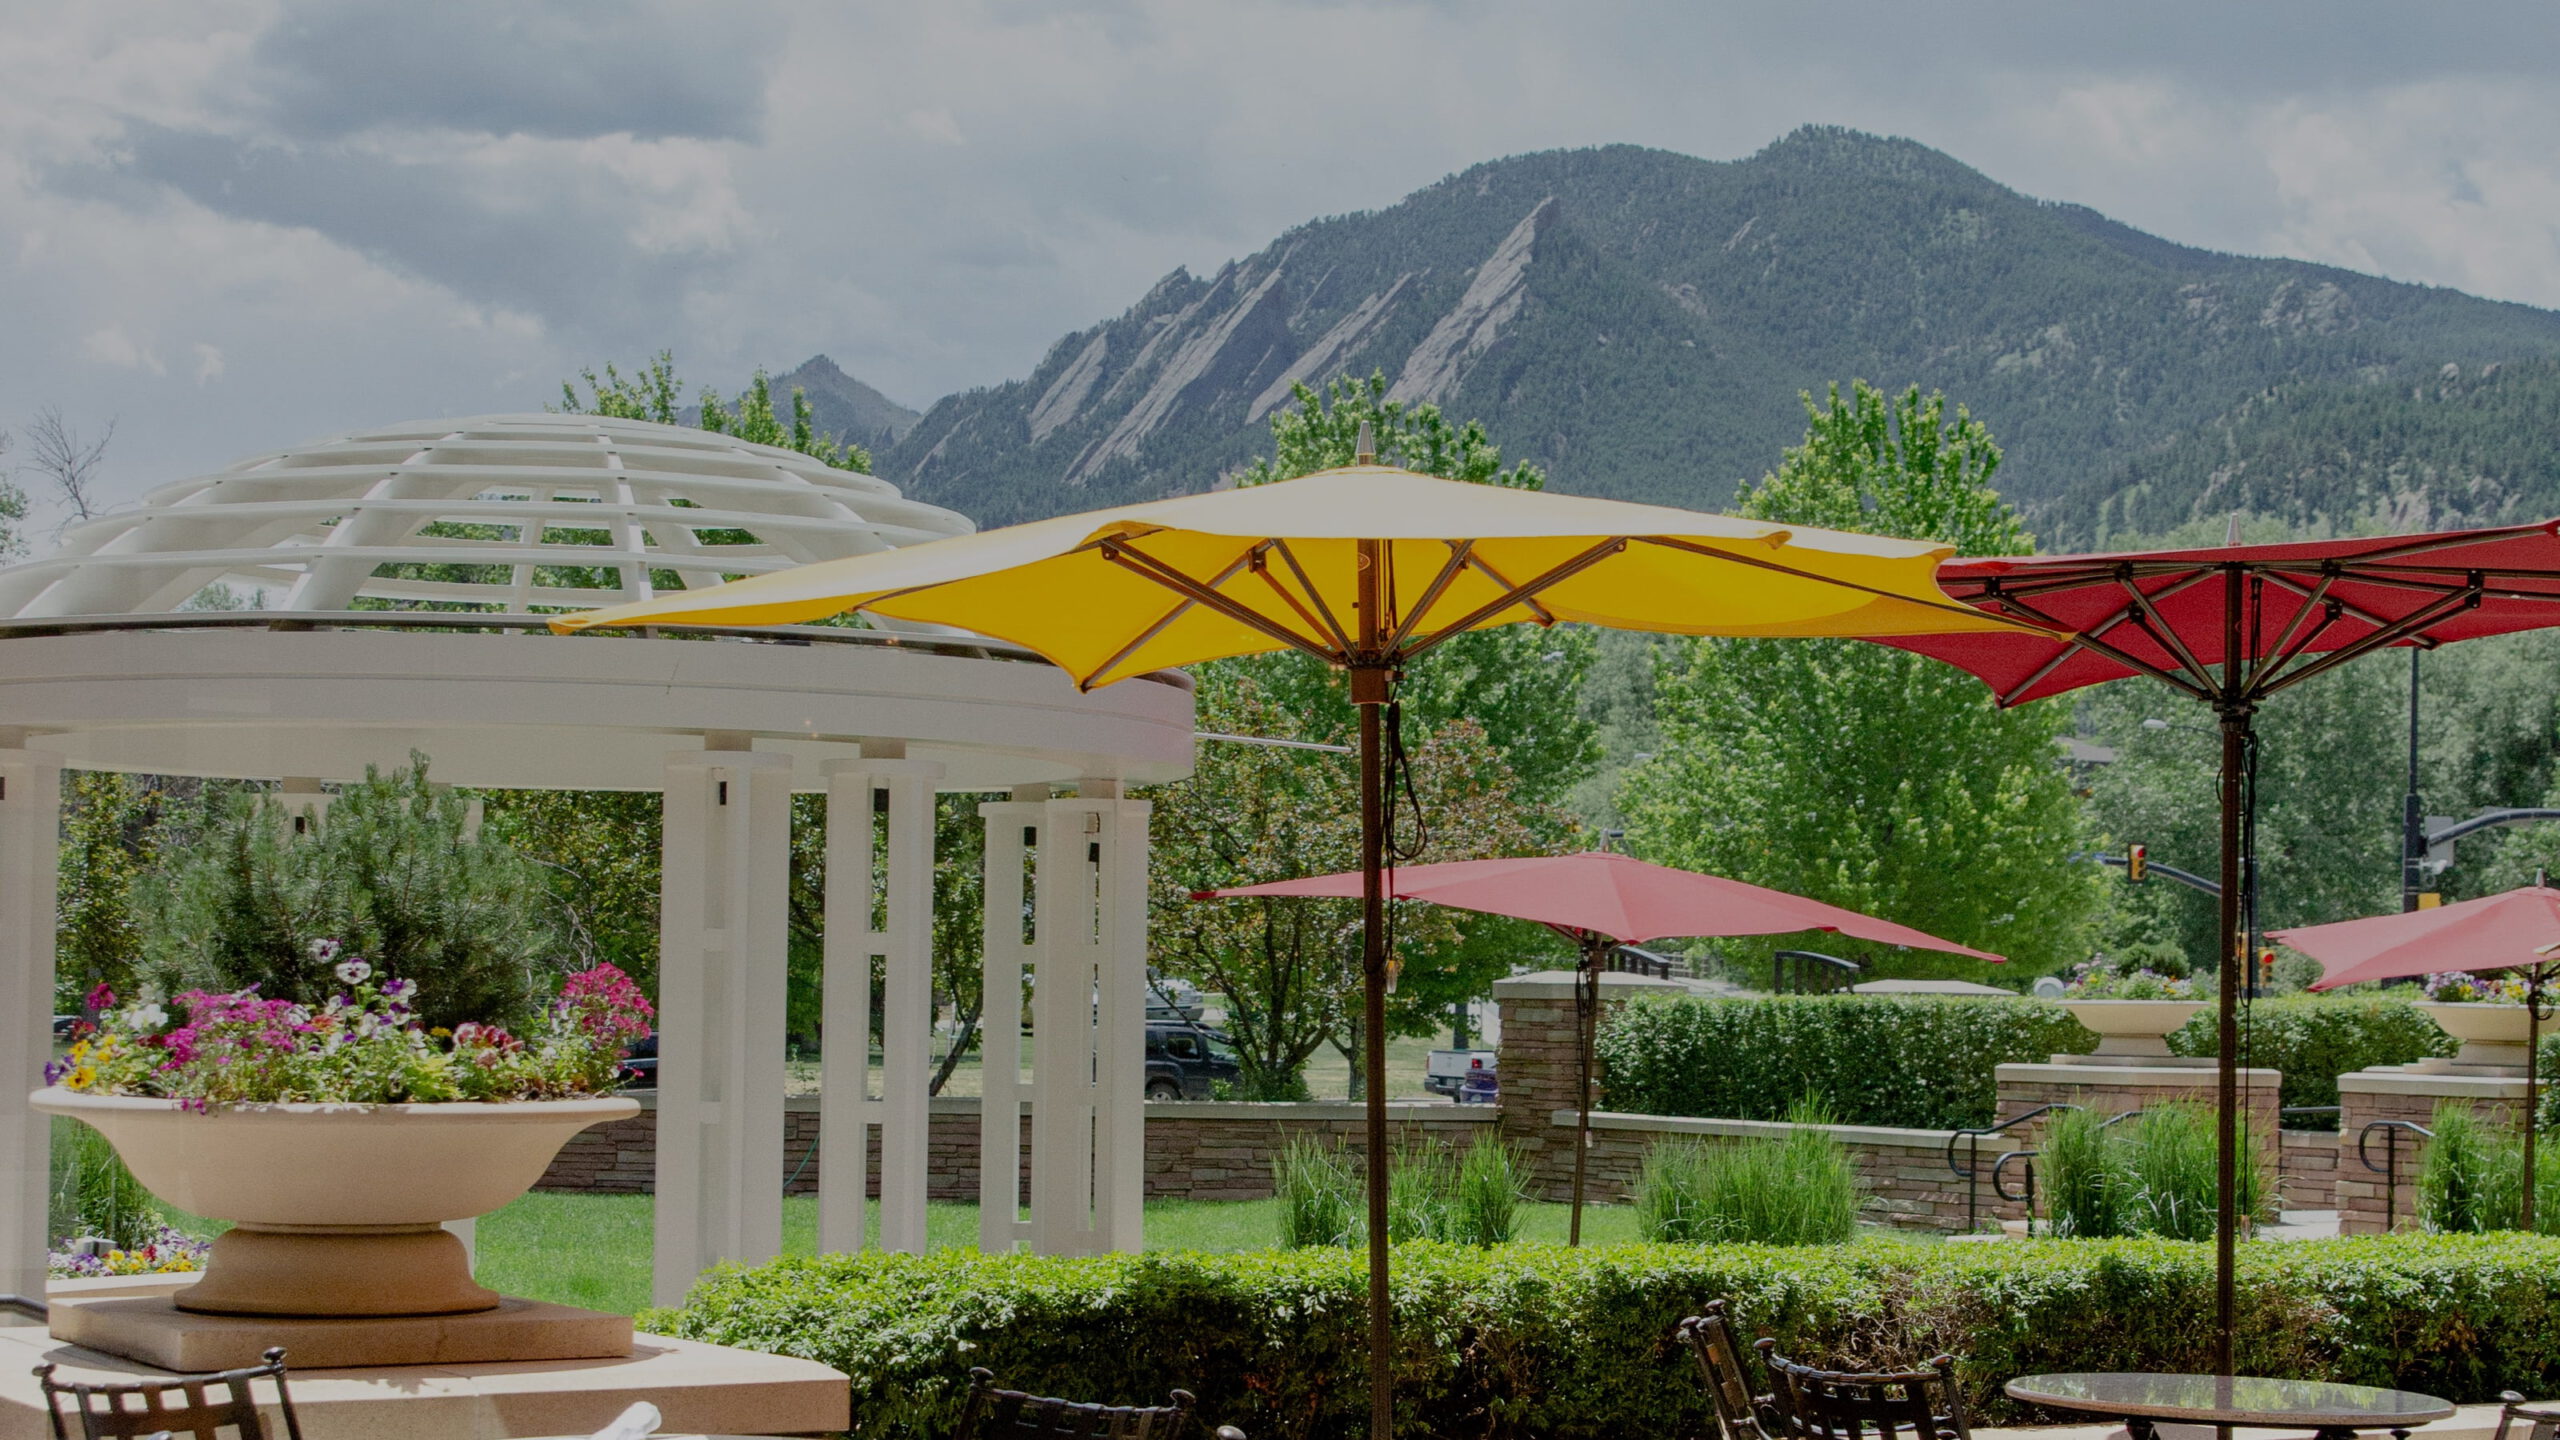 Outdoor seating and umbrellas against the mountains